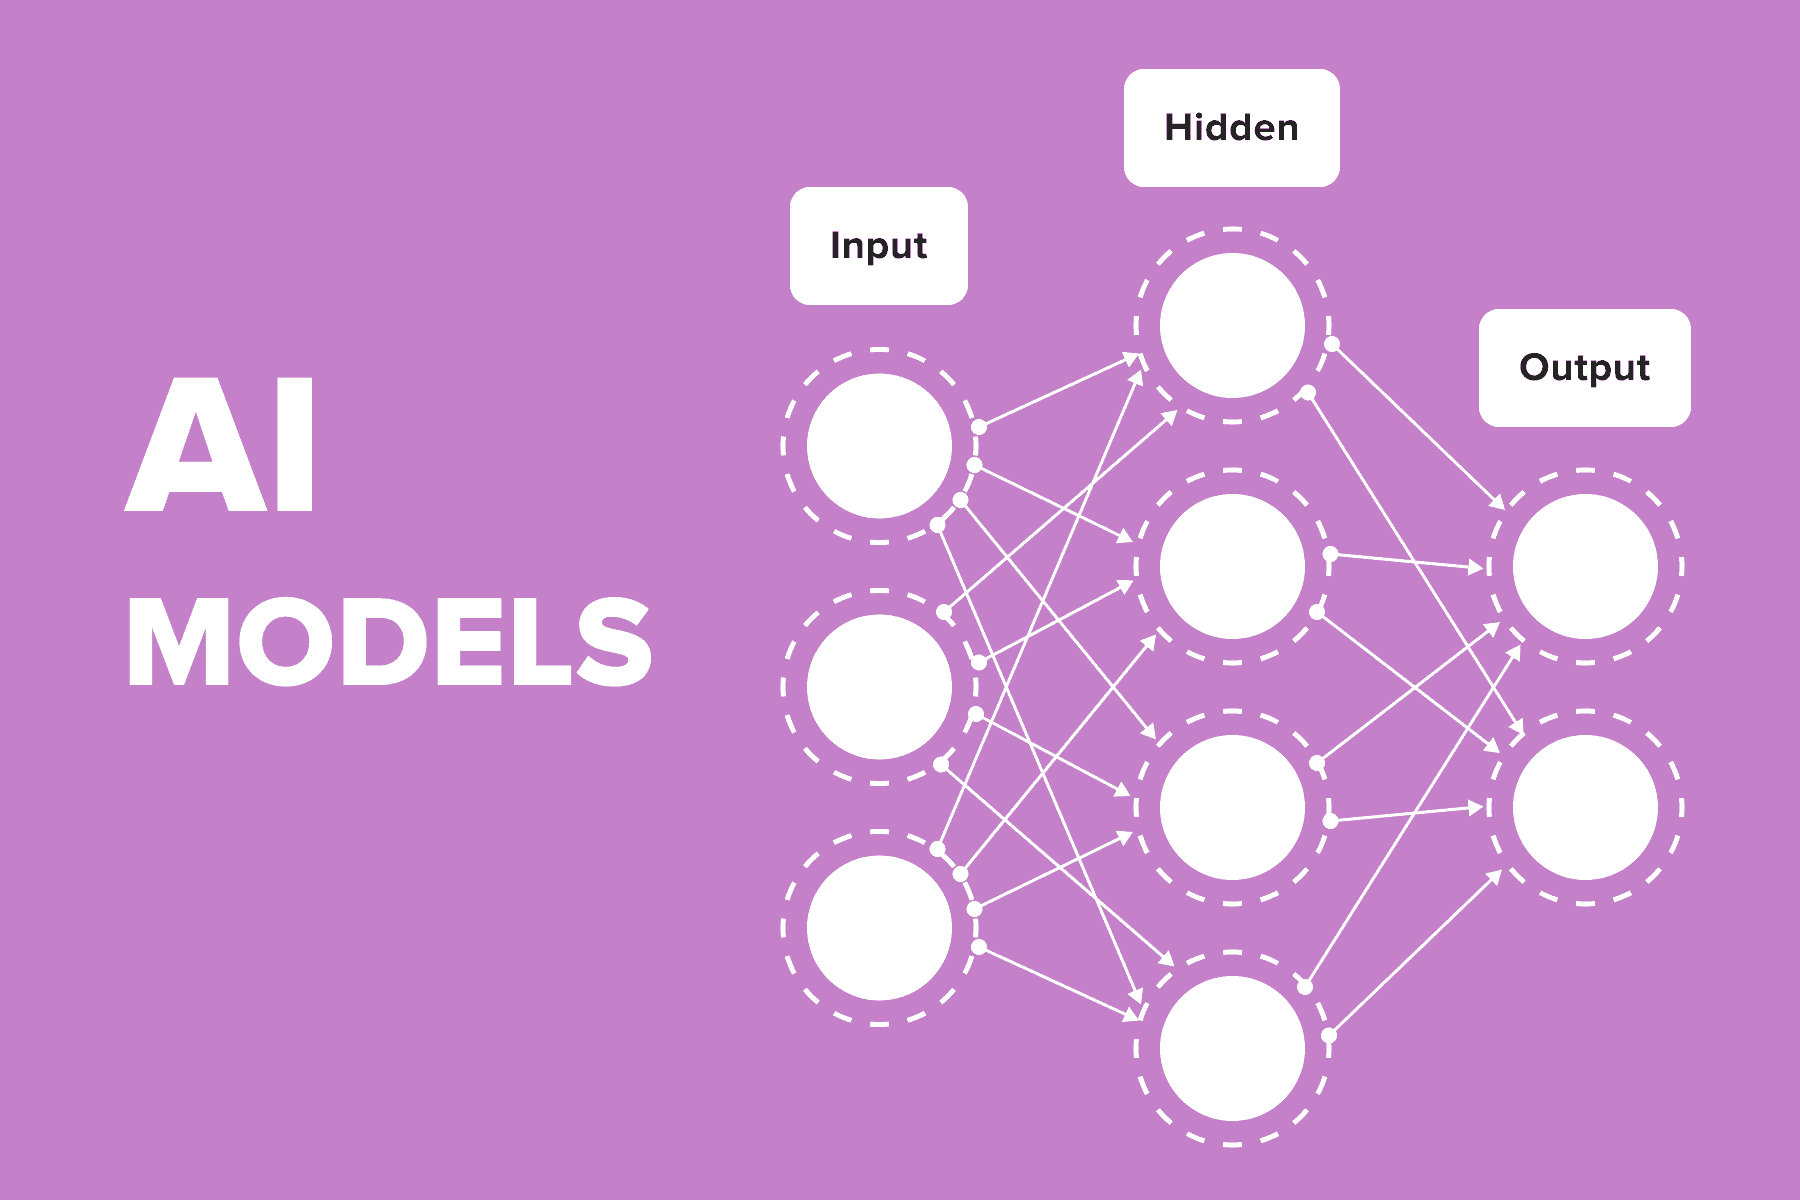 How to Build an AI Model for a Business: Five Major Steps